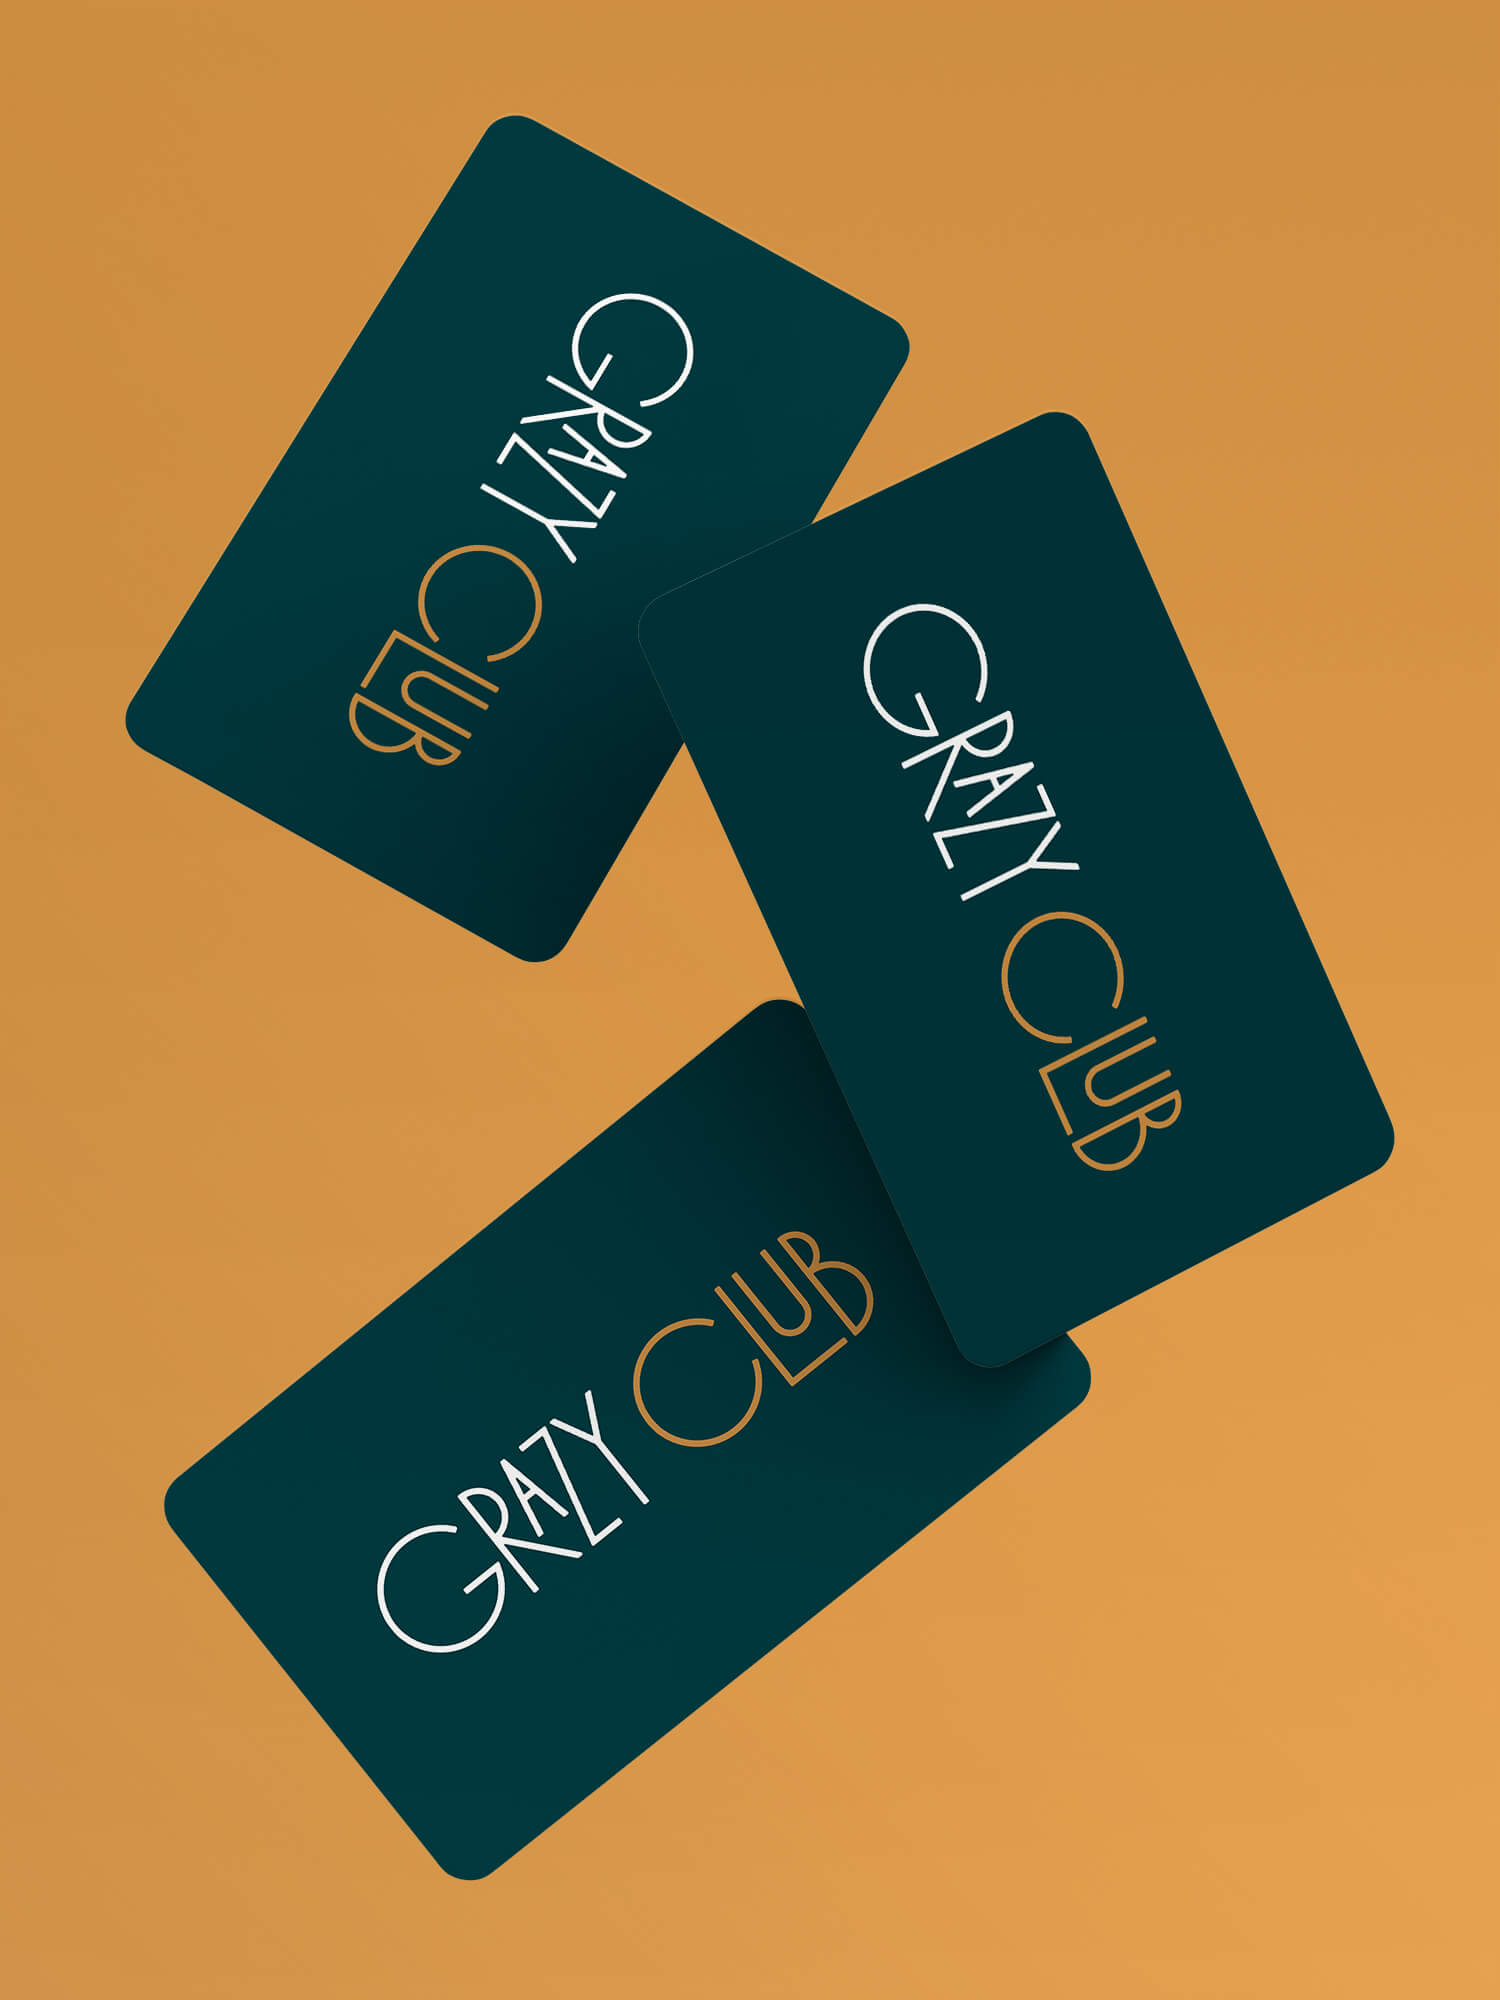 Three Grazy Club membership cards falling from above